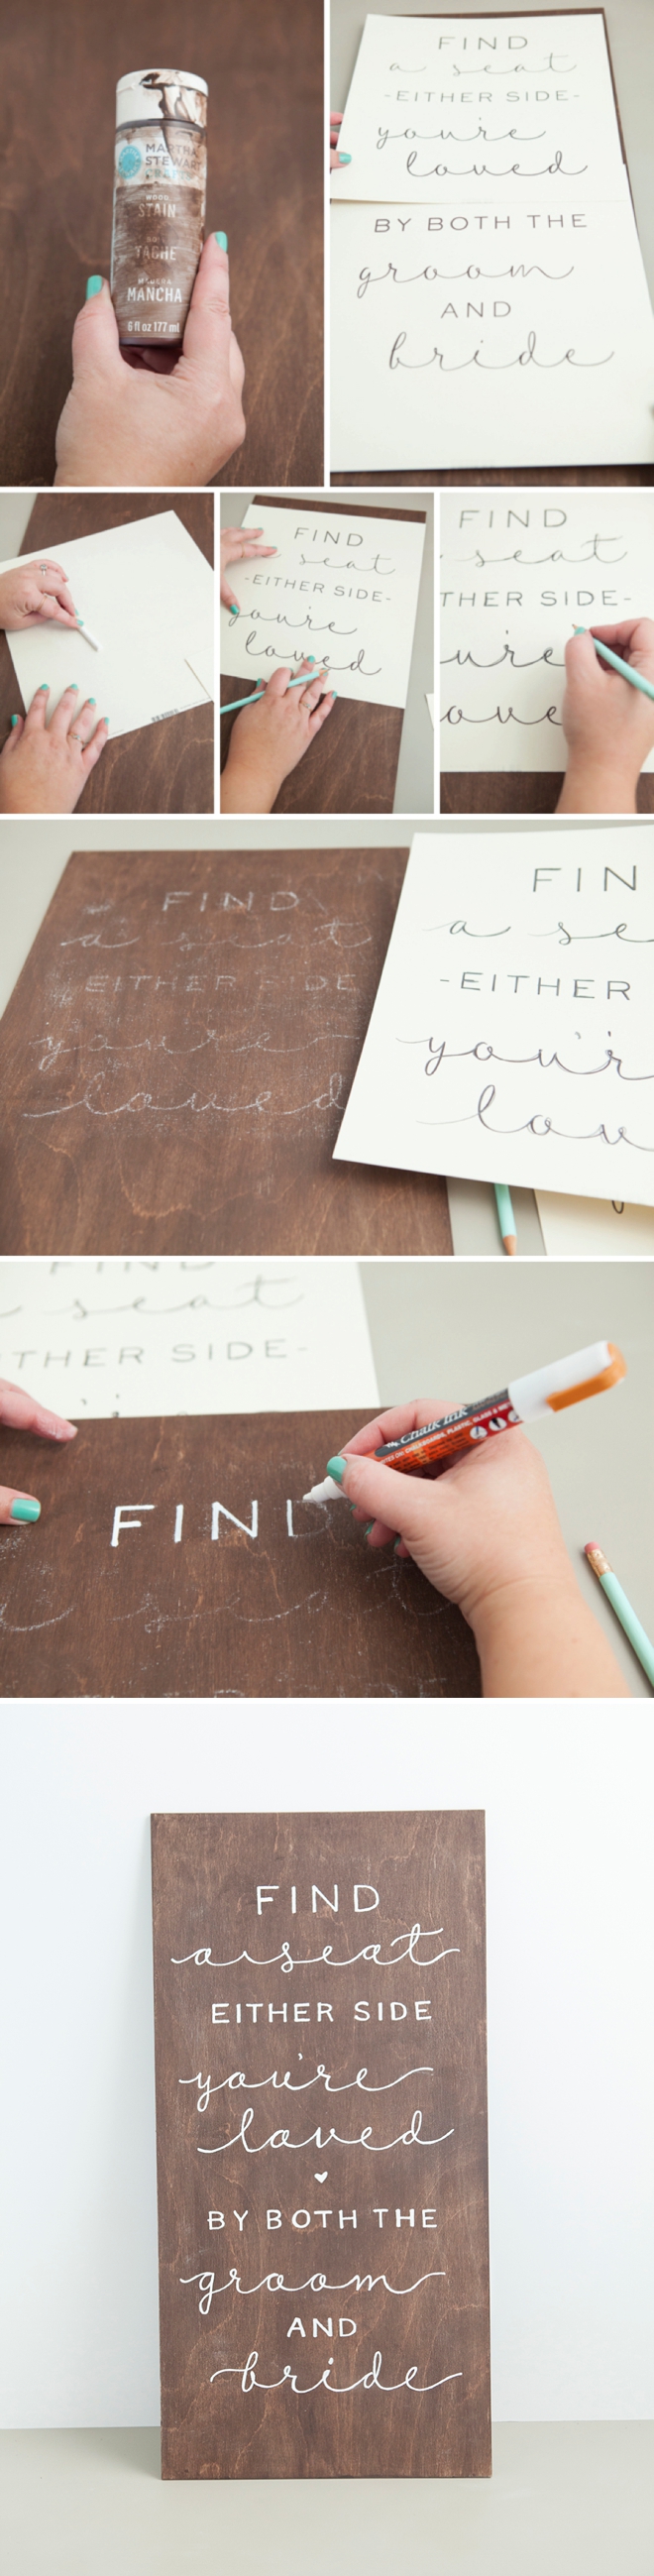 How to transfer a printed design onto a sign to easily trace!